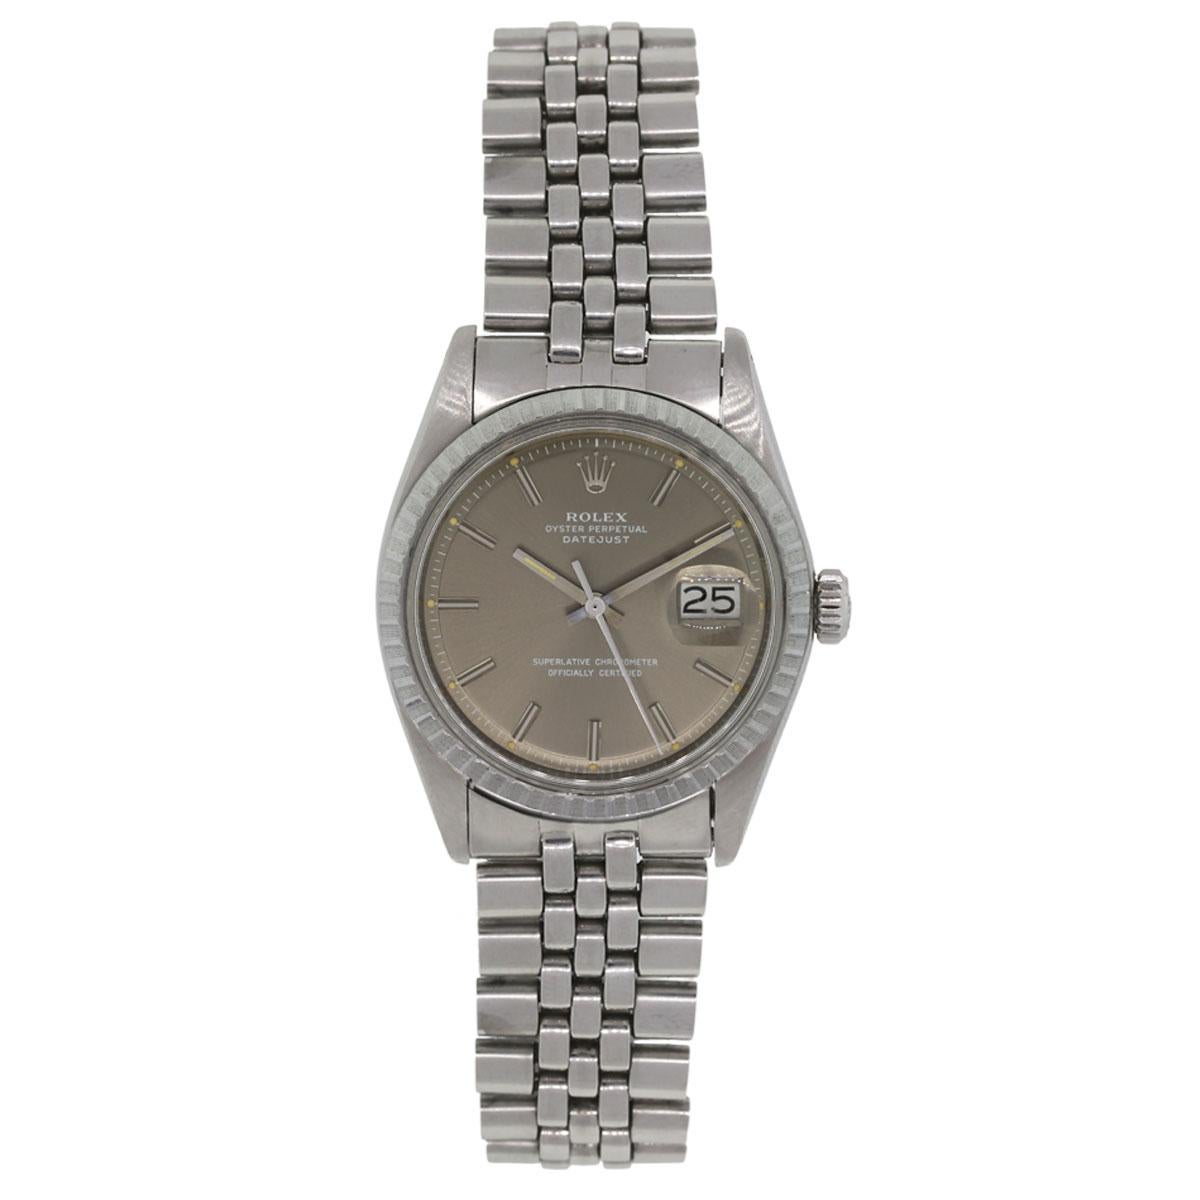 Brand: Rolex
MPN: 1601
Model: Datejust
Case Material: 
Case Diameter: 36mm
Crystal: Plastic
Bezel: Engine turned bezel
Dial: Silvered dial with date window at the 3 o’clock position
Bracelet: Stainless steel jubilee band
Size: Will fit a 8″